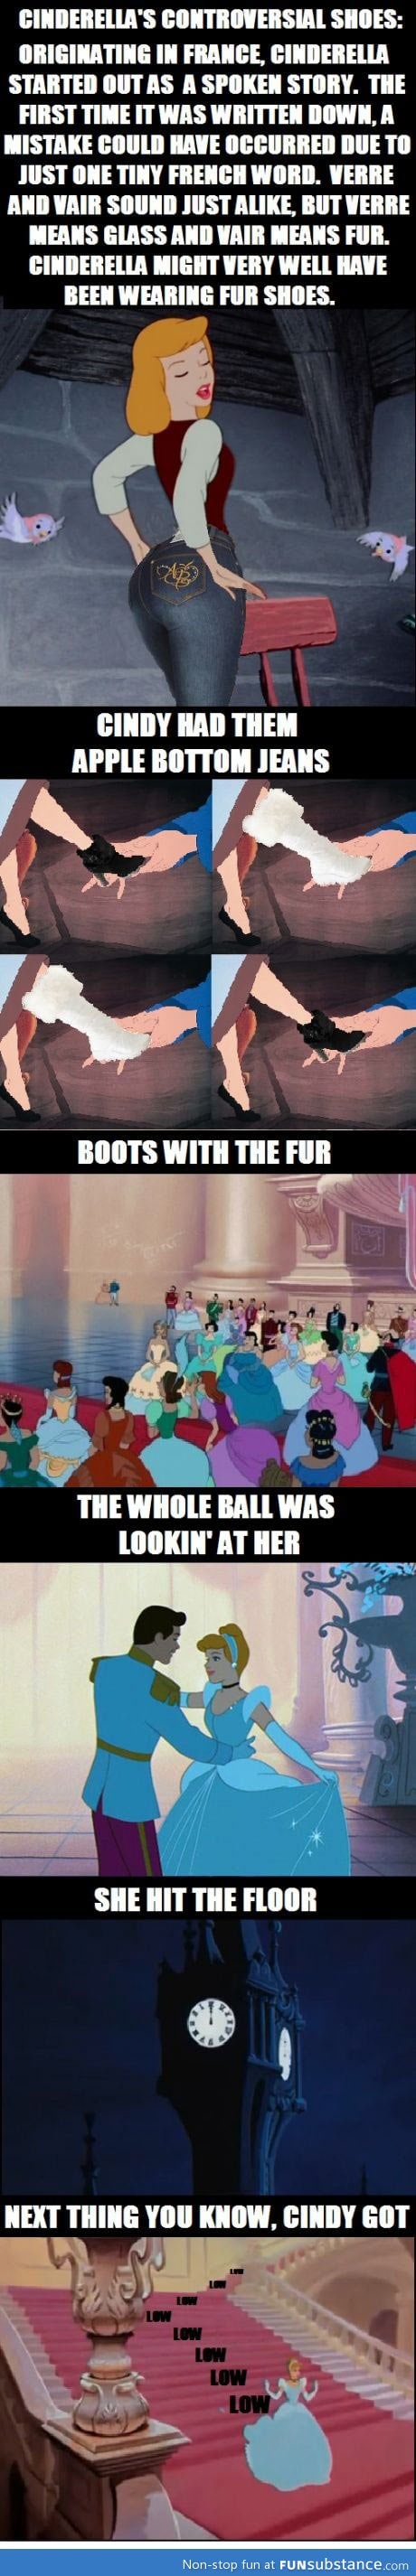 What if cinderella really had fur shoes?